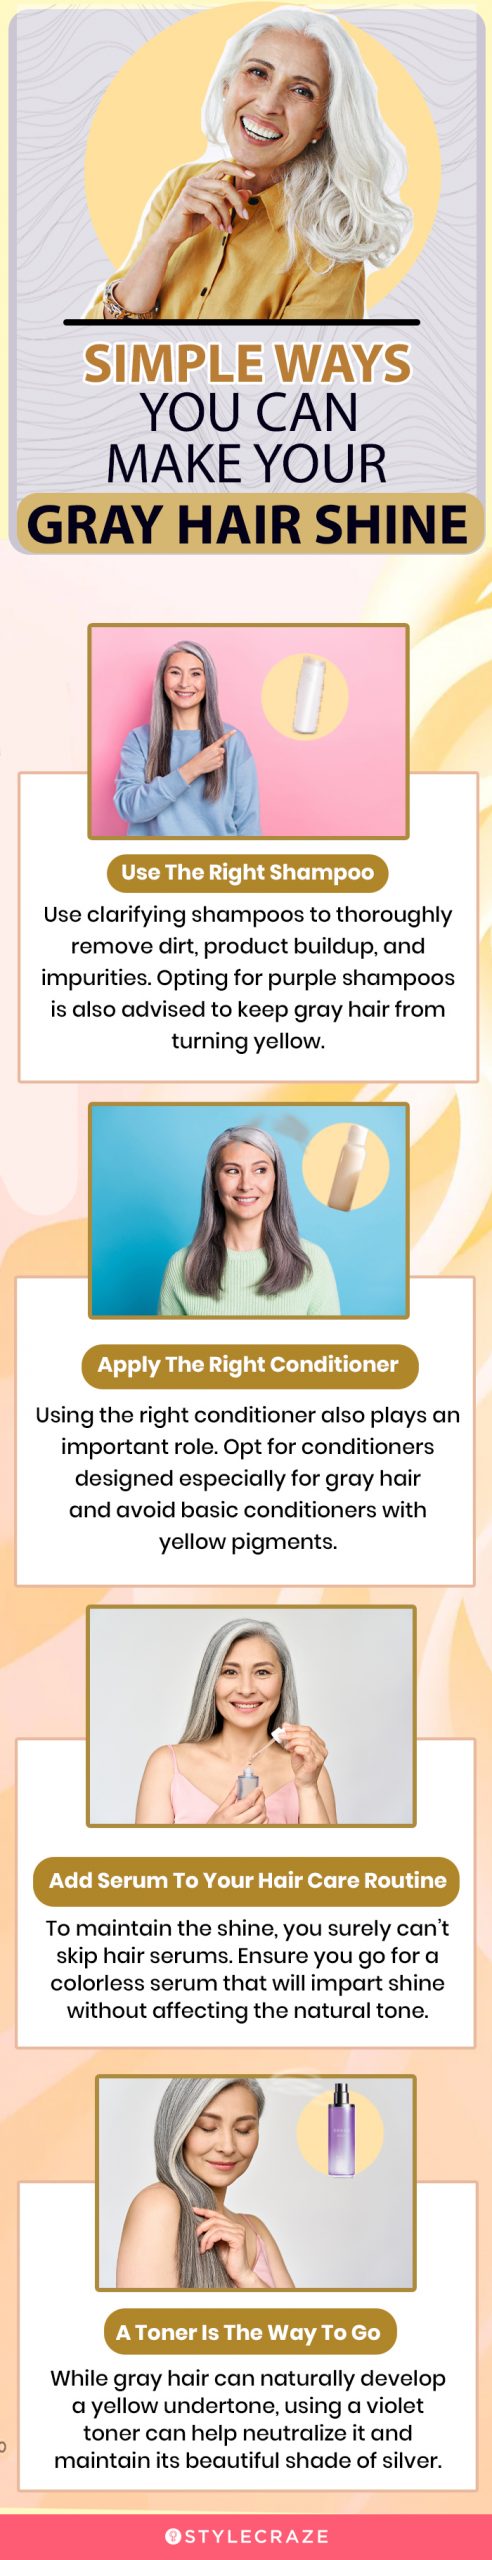 simple ways you can make your gray hair shine (infographic)